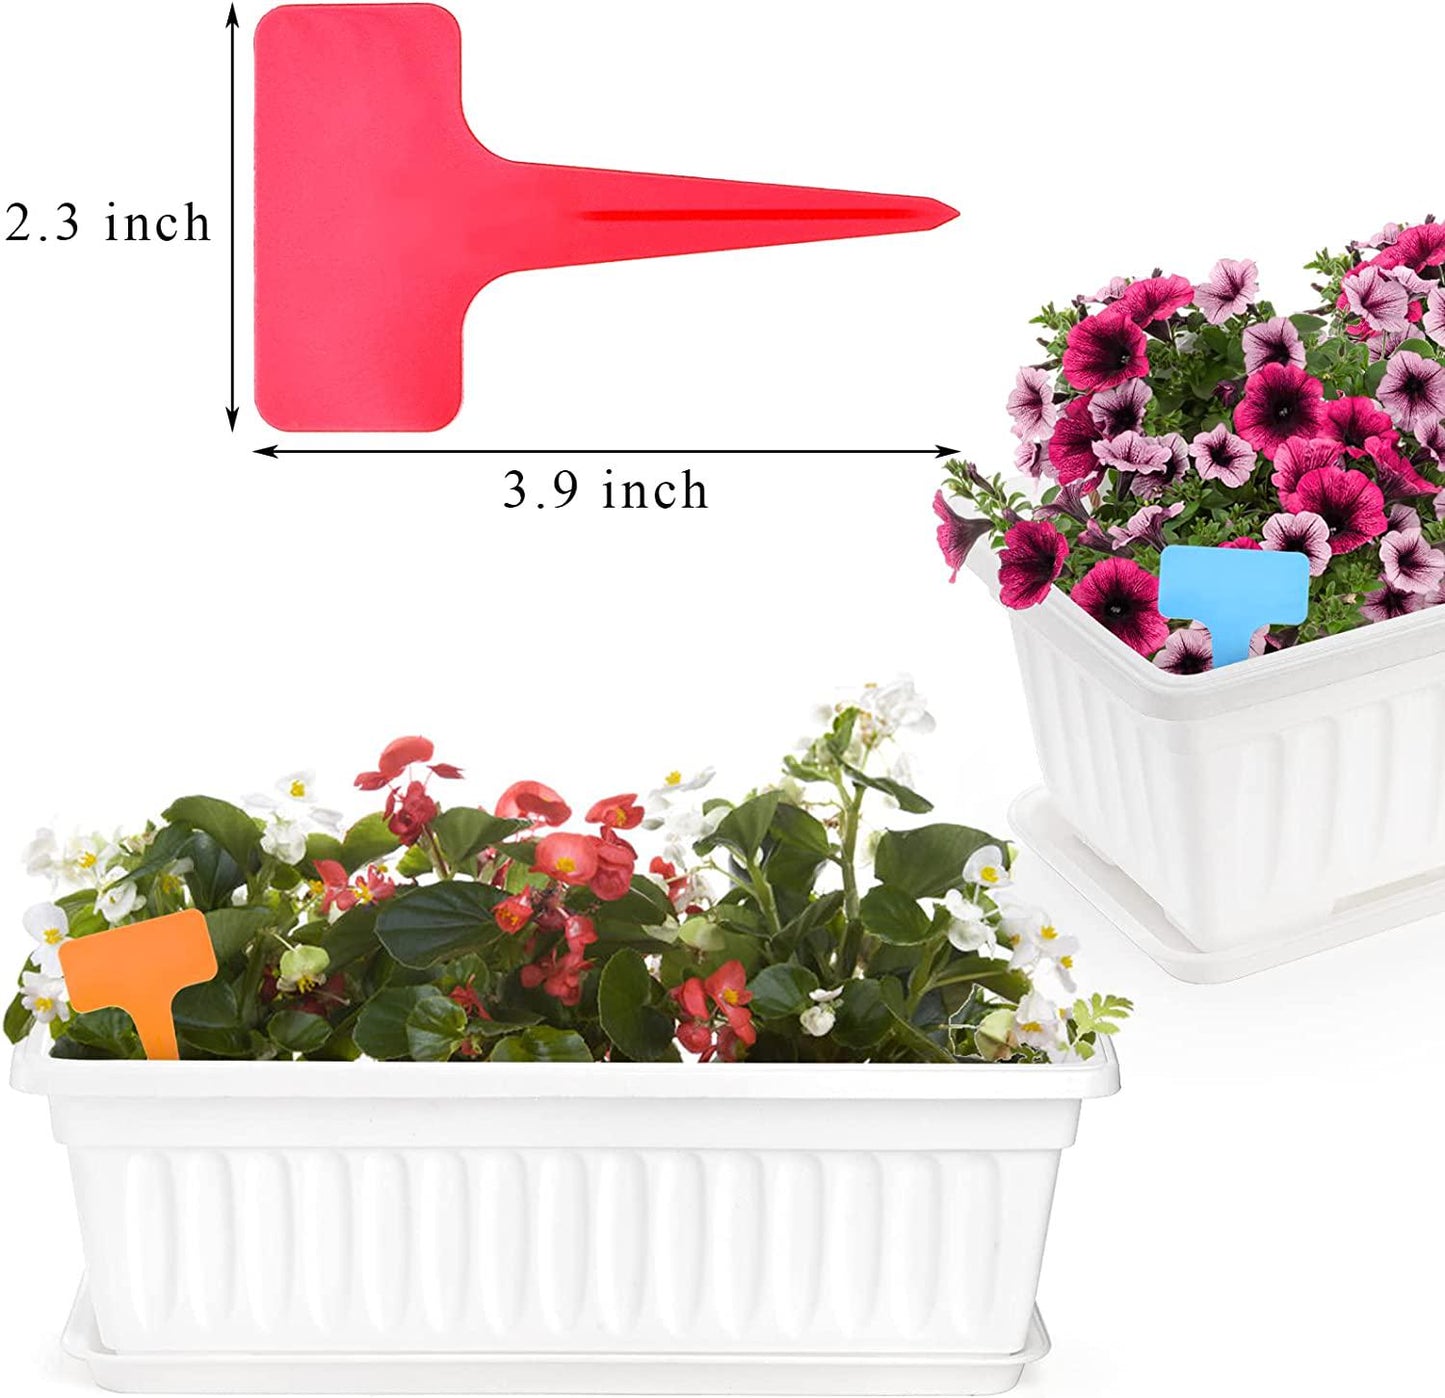 Fasmov 7 Pack 17 Inches White Flower Window Box Plastic Vegetable Planters with Trays Vegetables Growing Container Garden Flower Plant Pot for Balcony